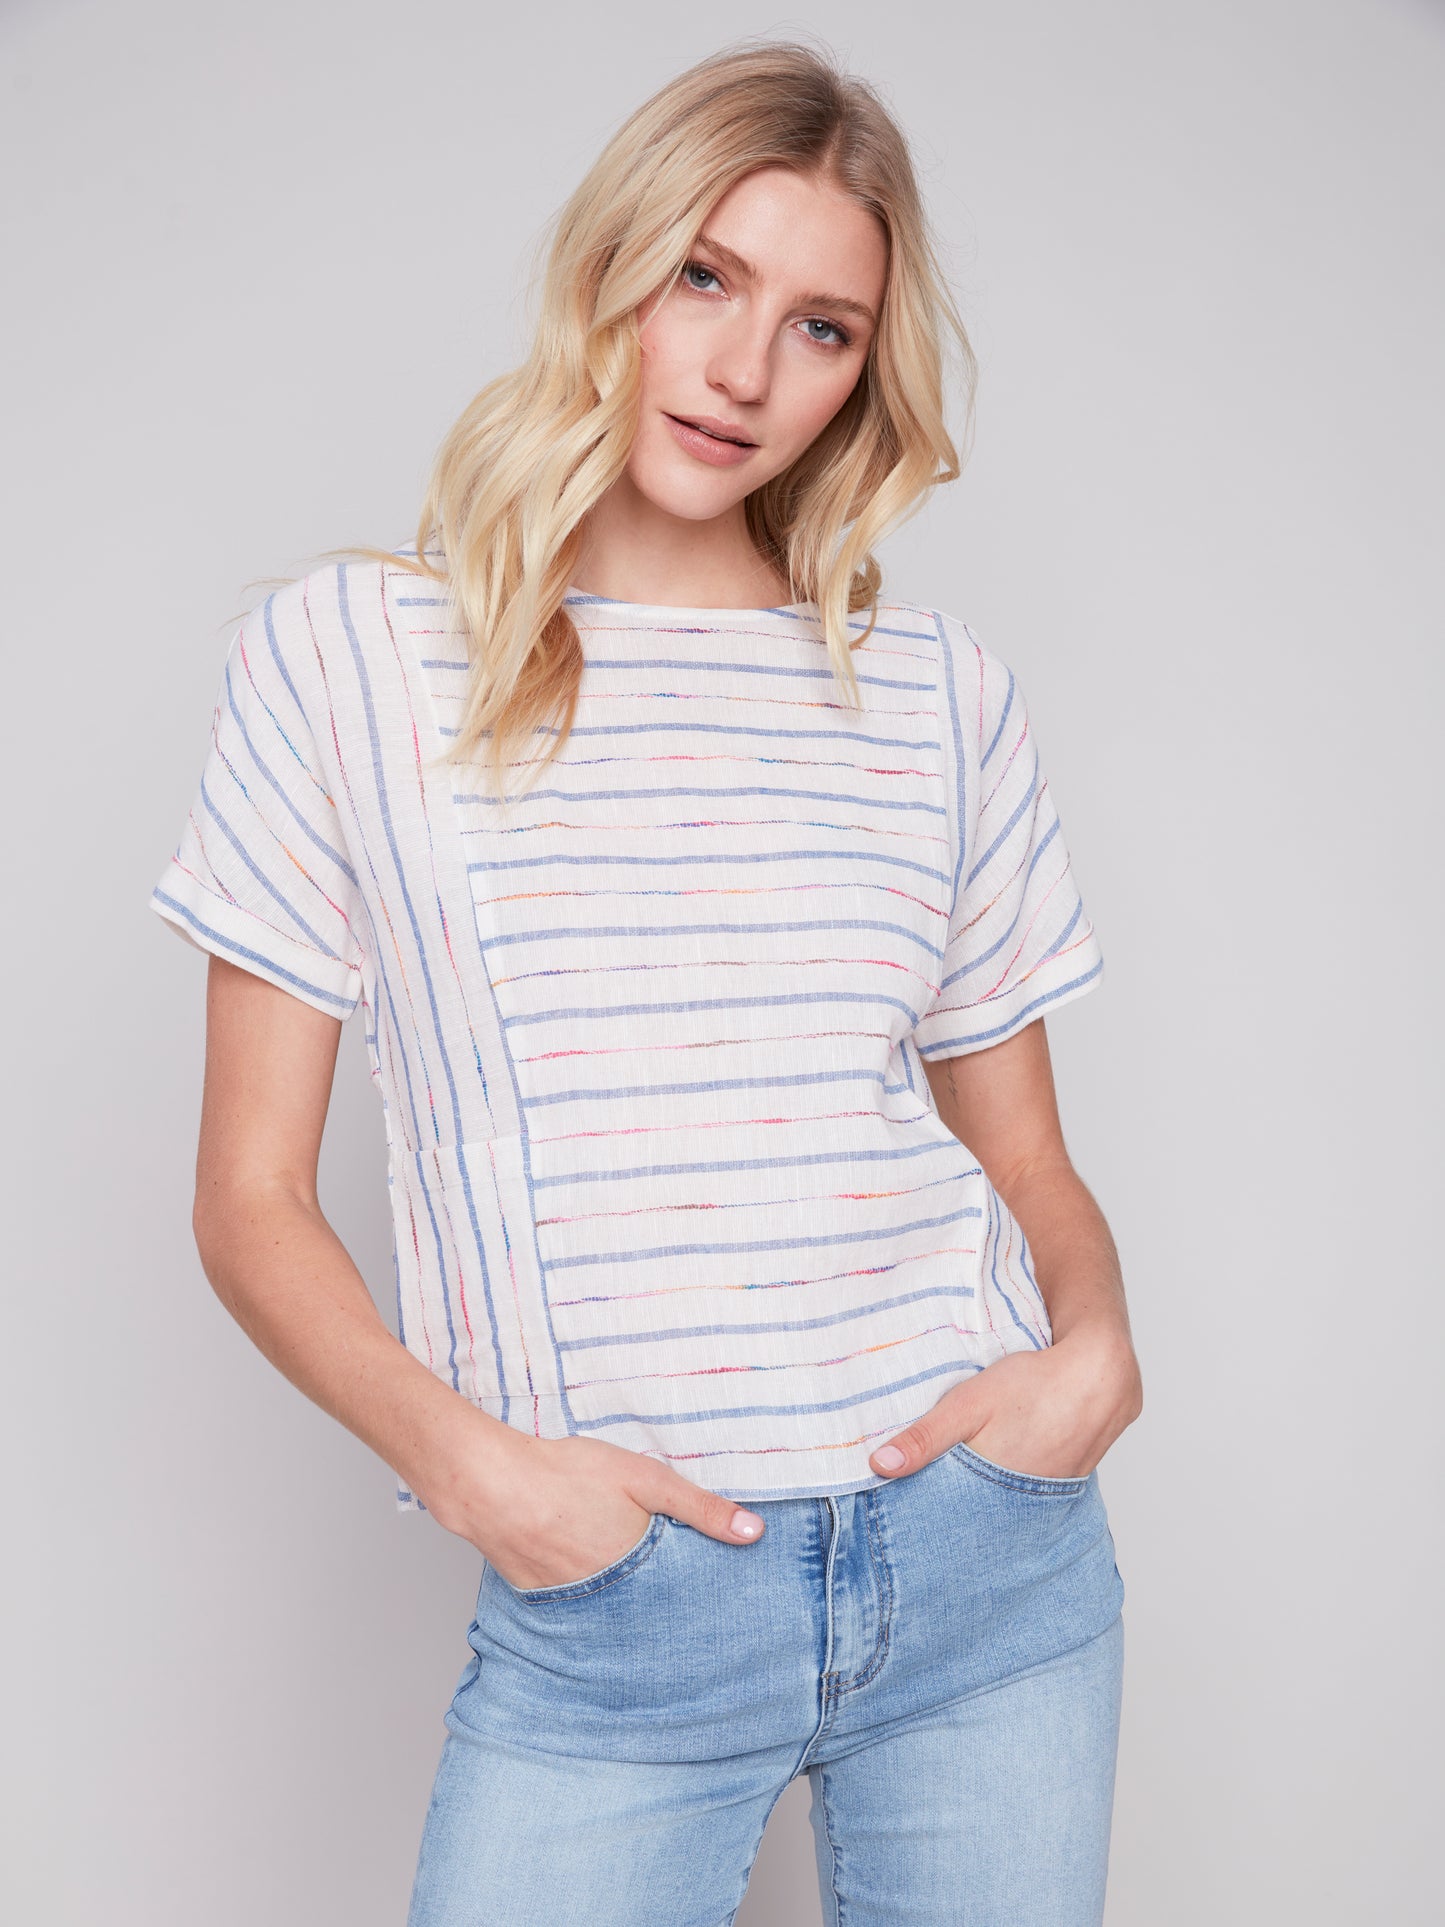 Striped Boxy Top with Pockets by Charlie B